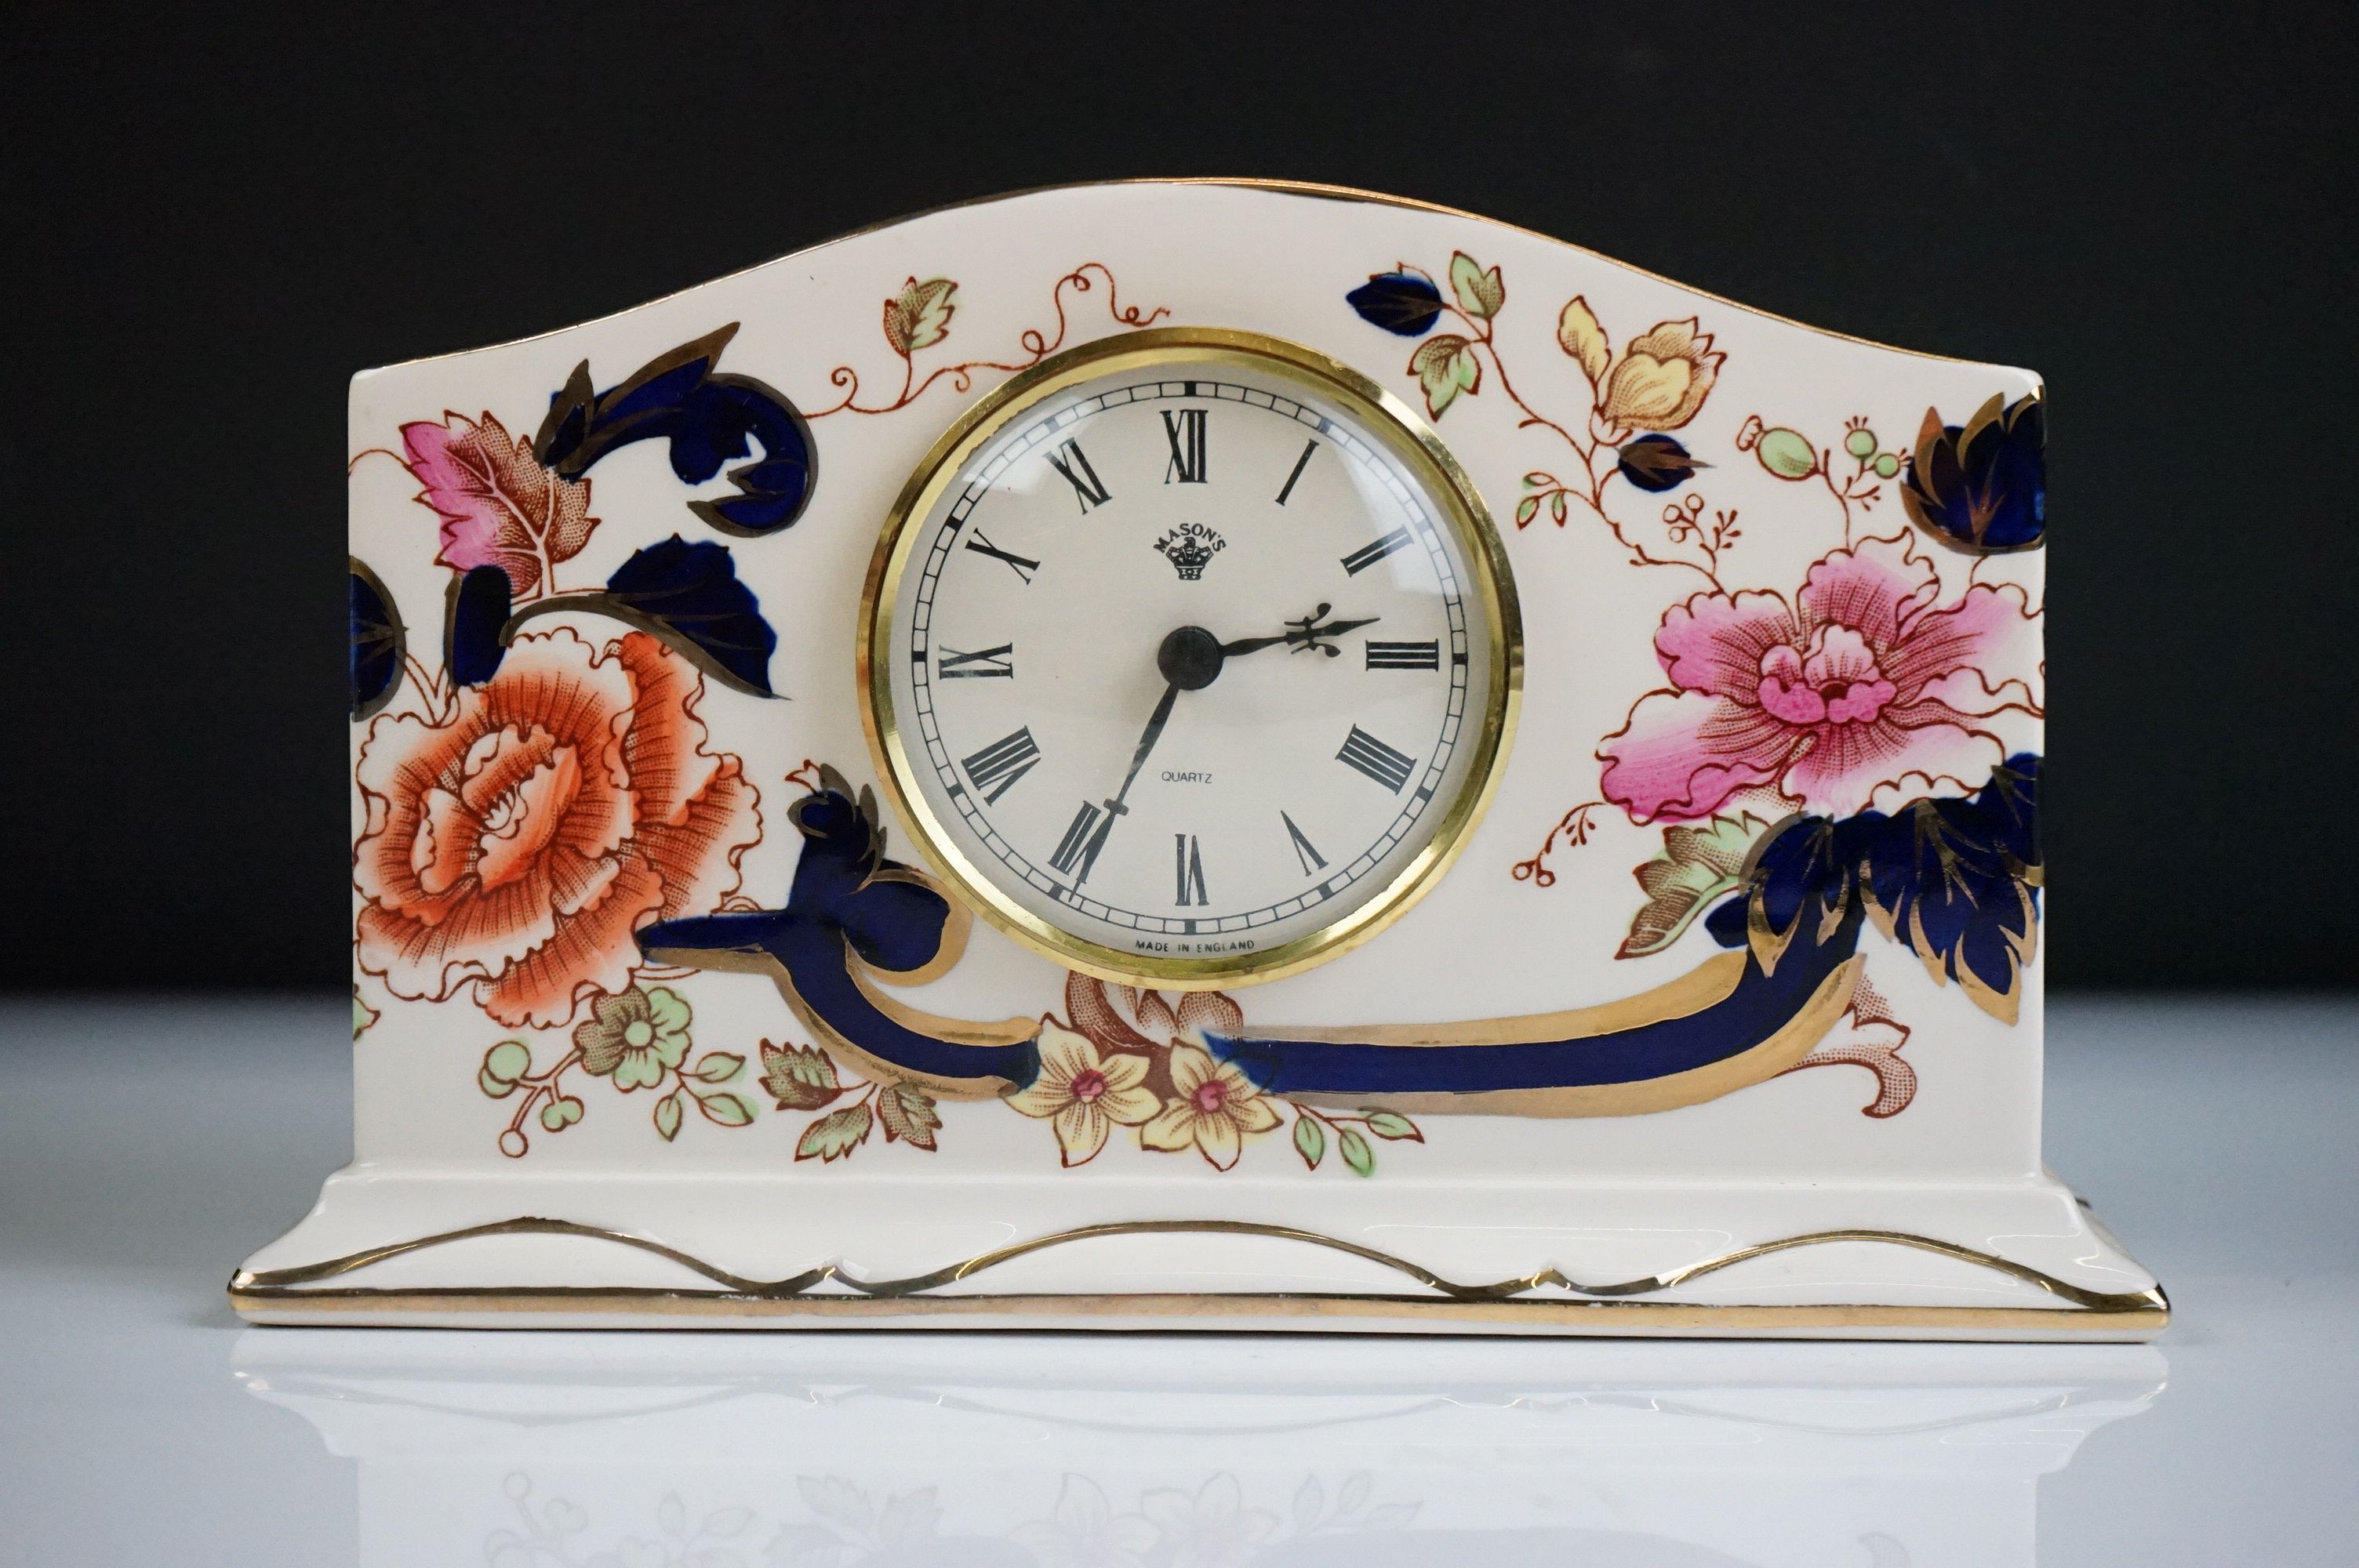 Masons Ironstone ' Mandalay ' pattern mantel clock together with a pair of Masons ' Brown Velvet ' - Image 2 of 16